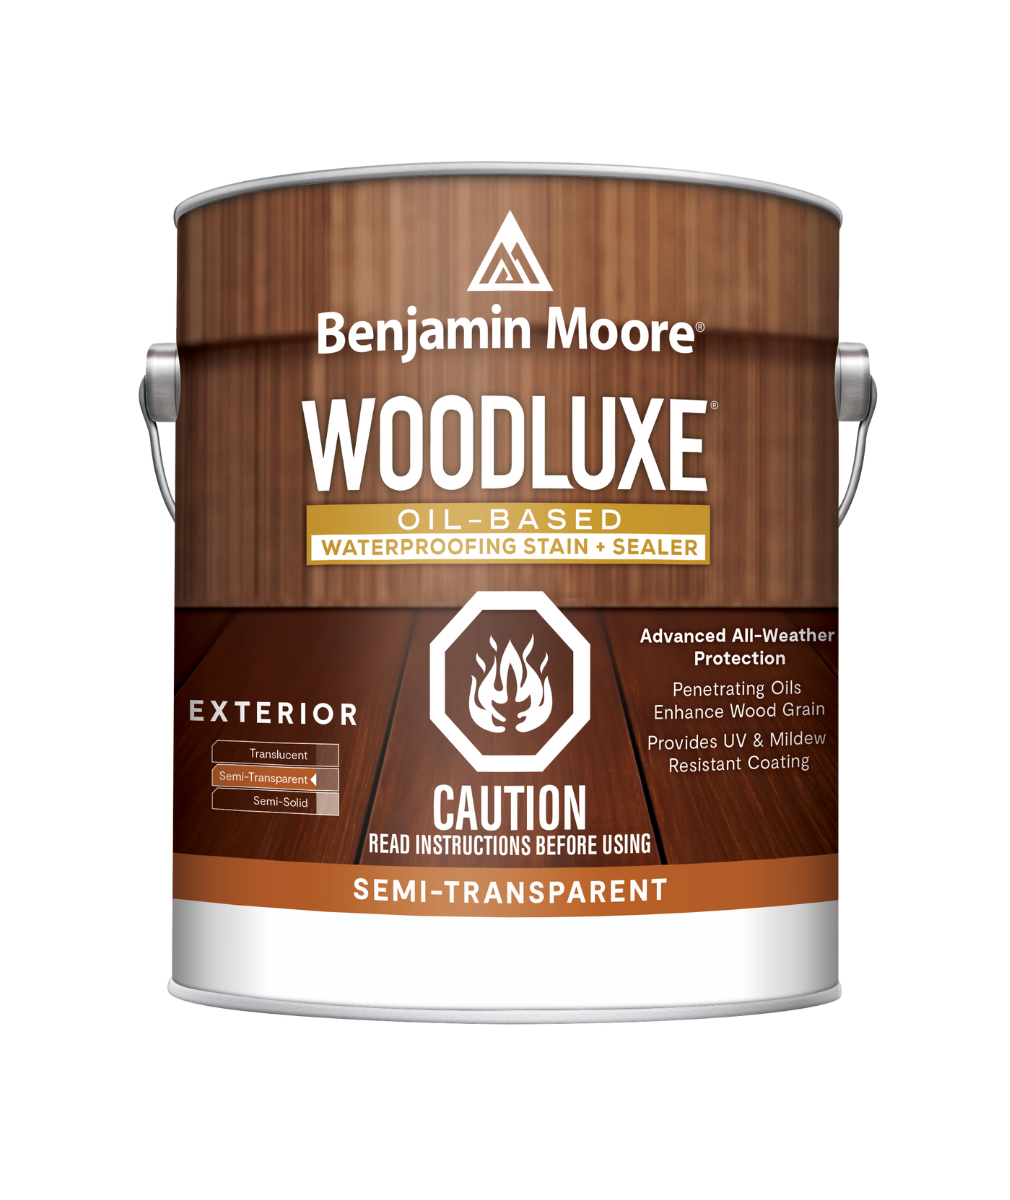 Woodluxe® Oil-Based Semi-Transparent